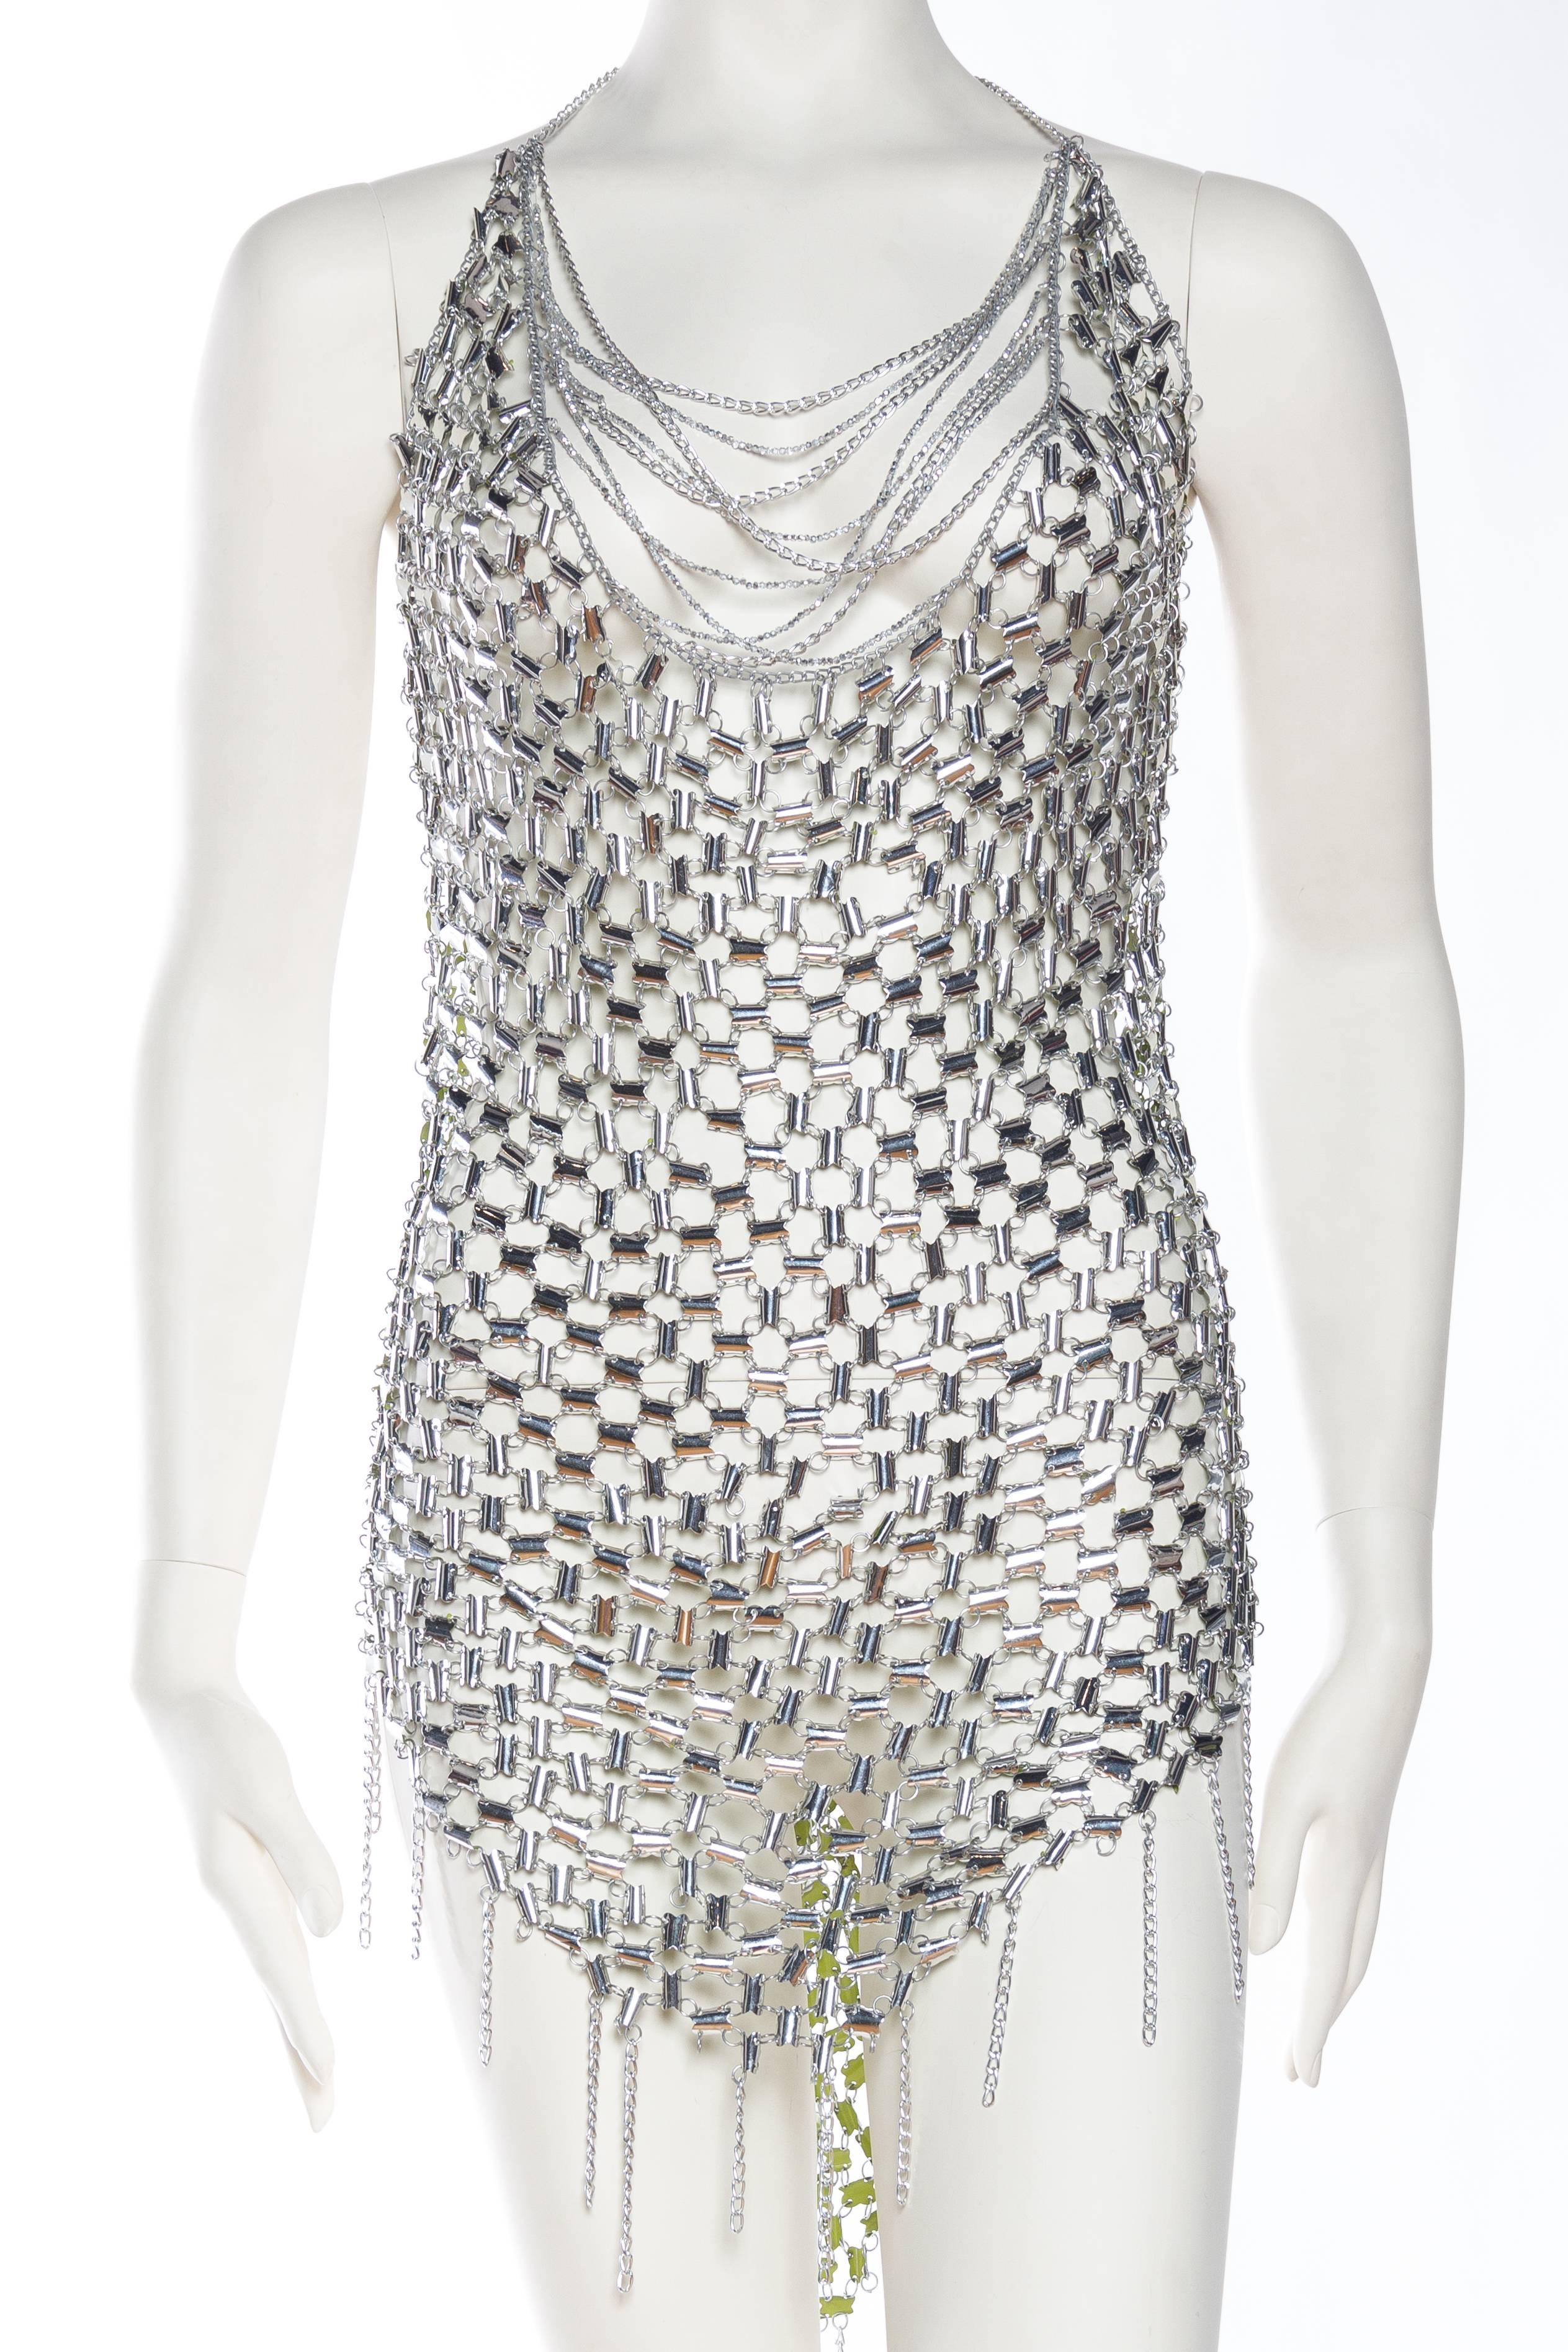 This dress looks to have been made from an original 1960s plastic and aluminum link dress attributed to Paco Rabbane. The piece has been greatly altered however with crystals and fringe. Piece is reversible to lime green.